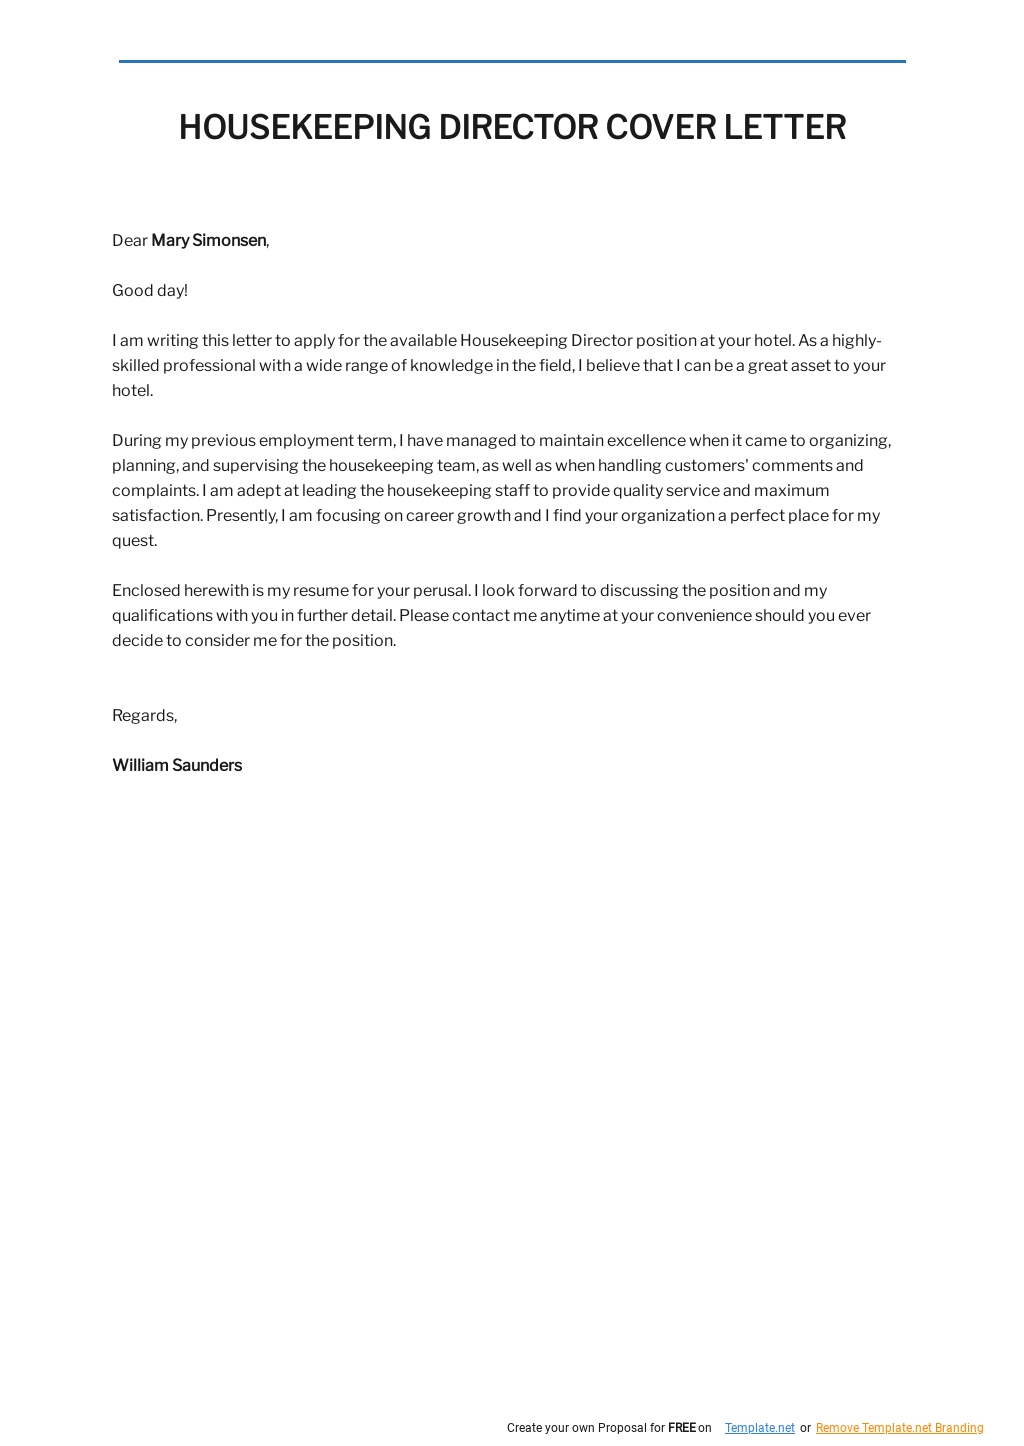 Free Housekeeping Director Cover Letter Template.jpe